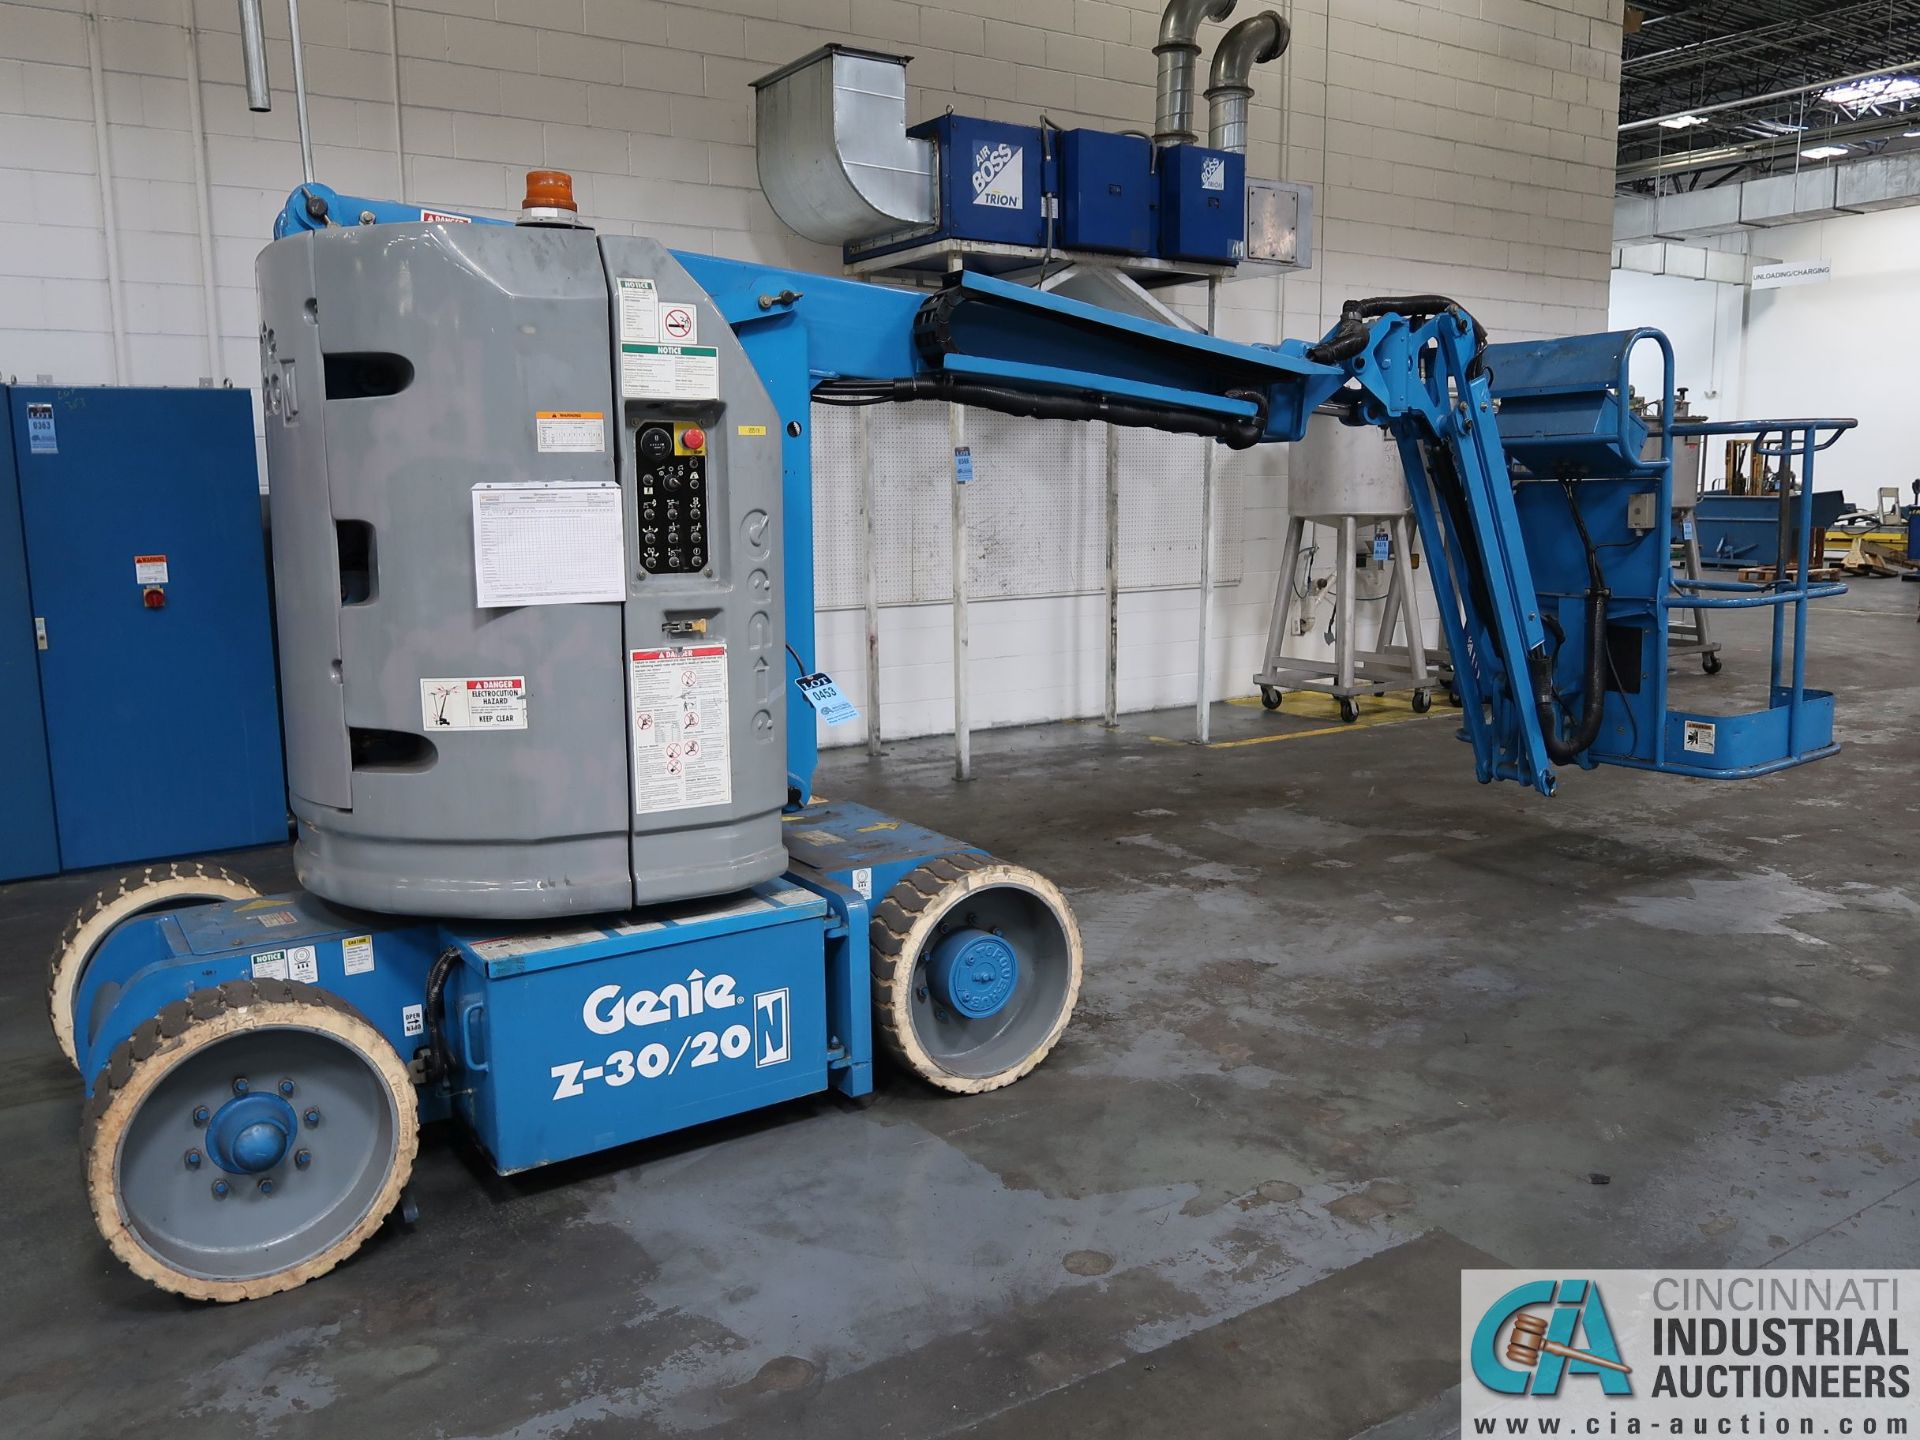 36' GENIE MODEL Z-30/20N ARTICULATED ELECTRIC BOOM LIFT; S/N 23ONO6-8304, 36' LIFT HEIGHT, 500 LB.